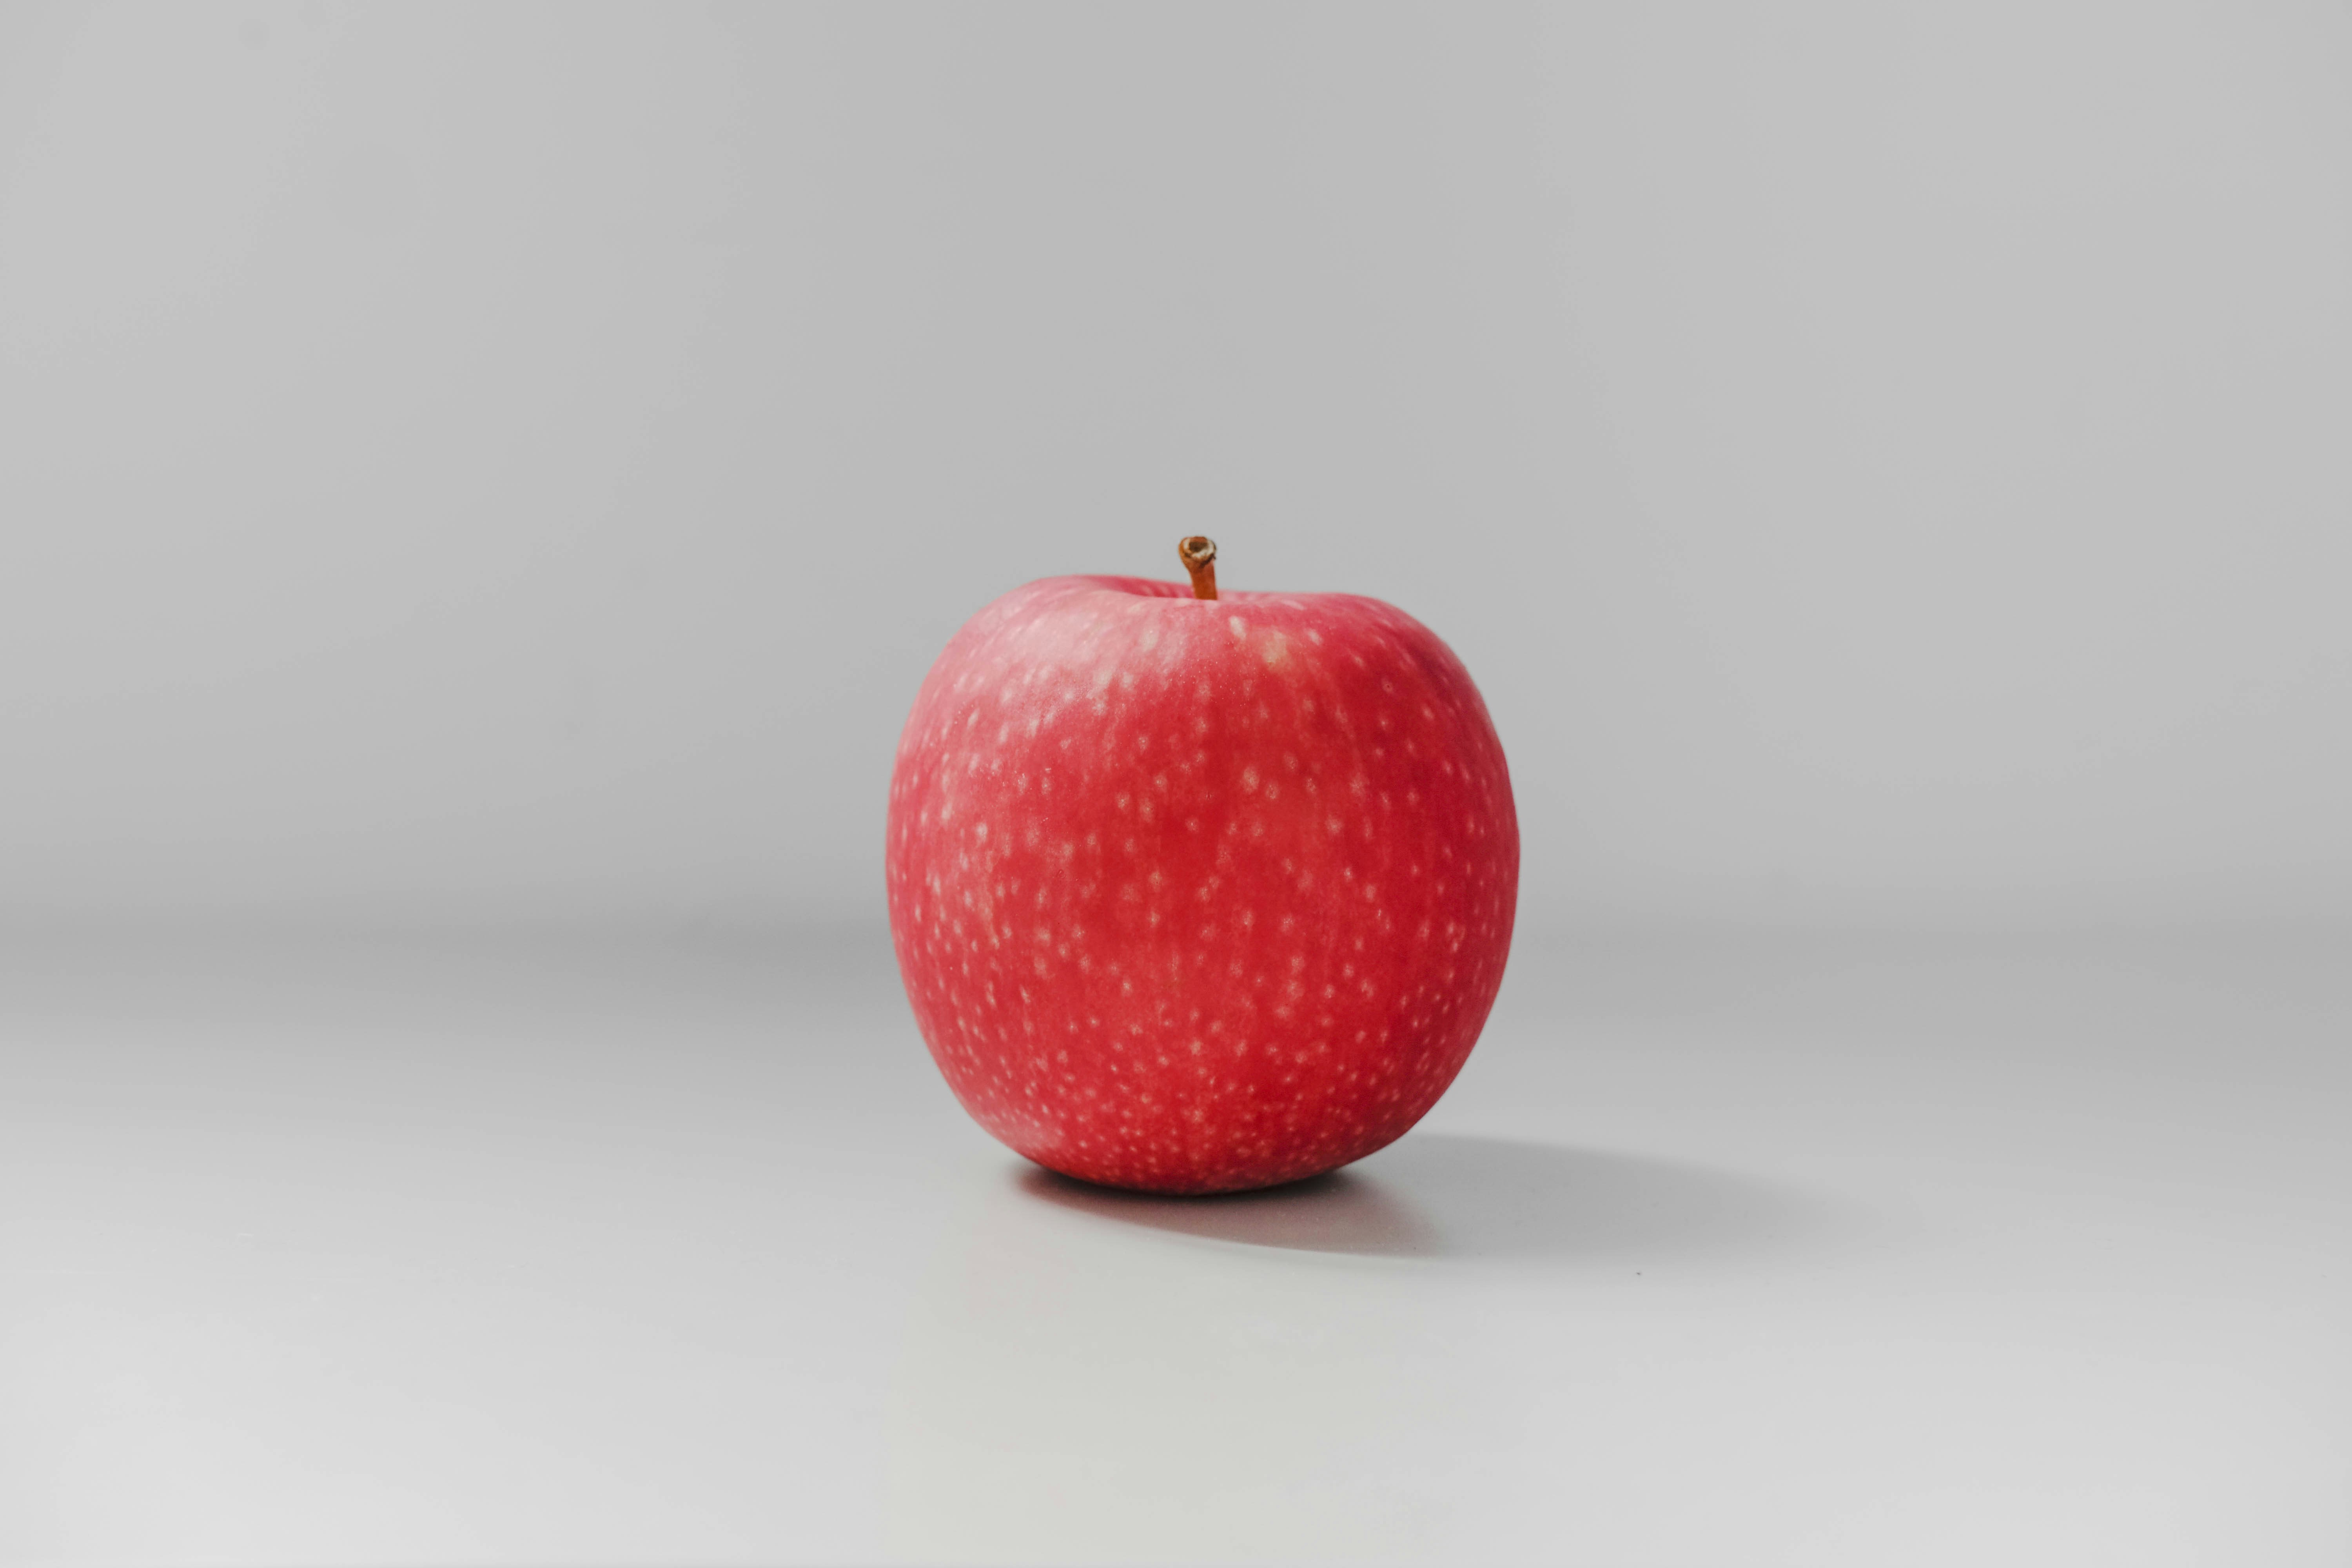 Apple in red